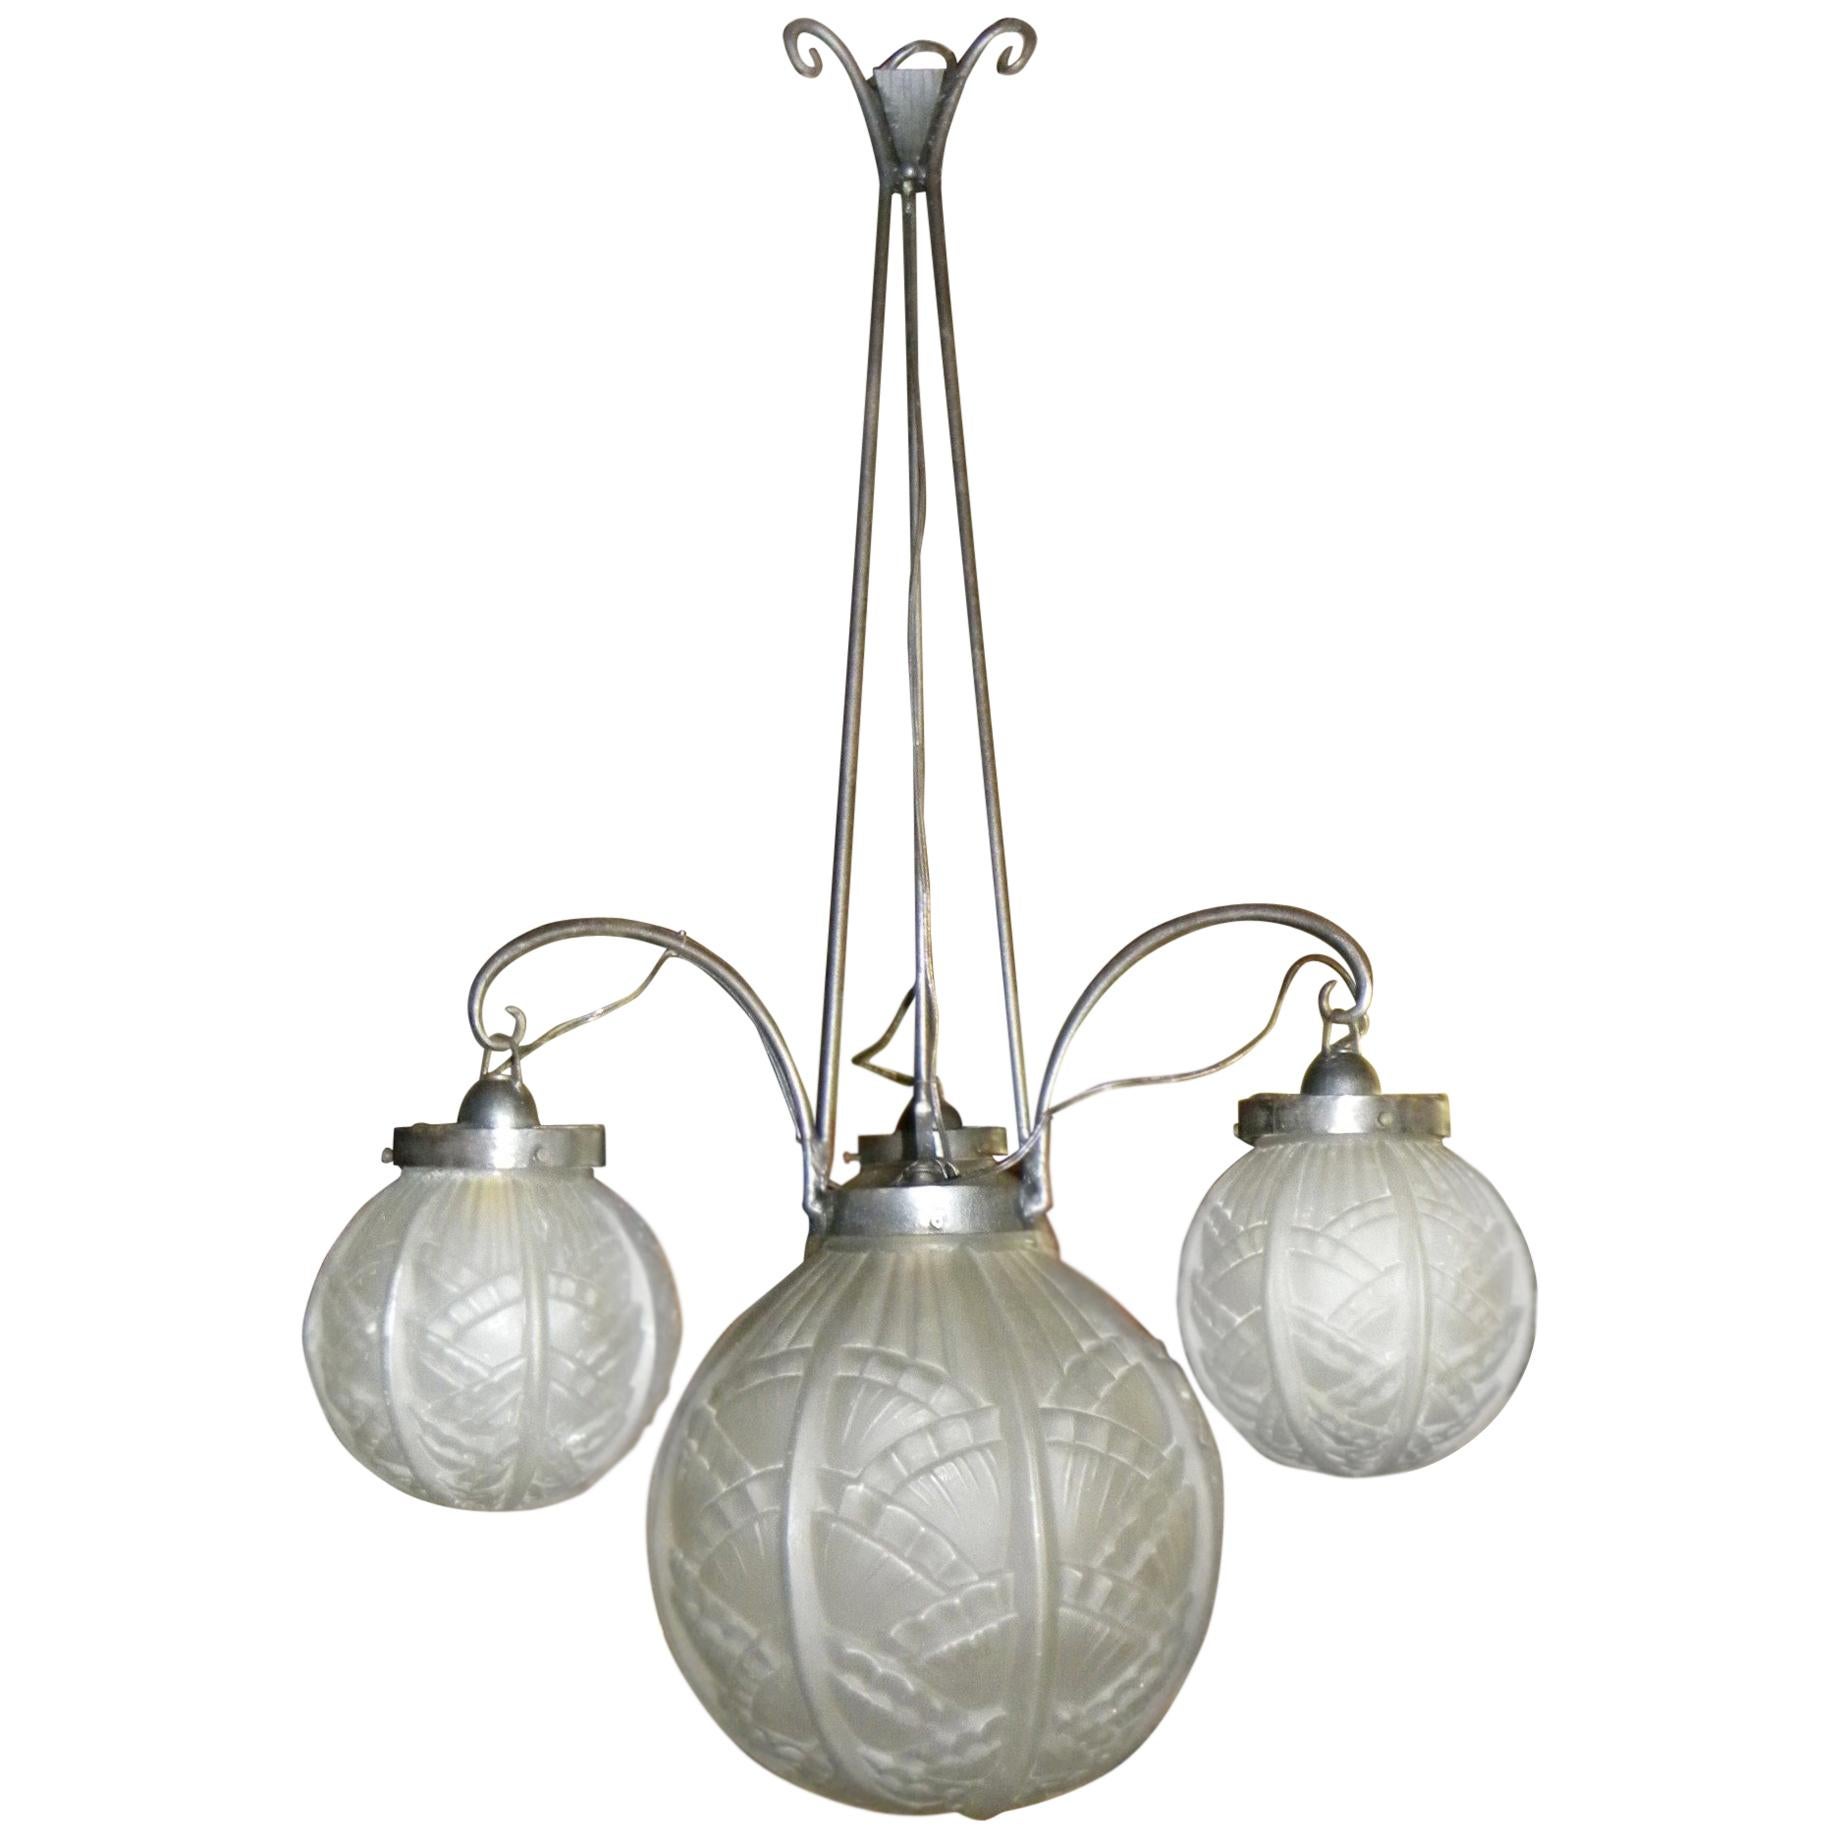 Art Deco Iron Chandelier with Pressed Glass Globes